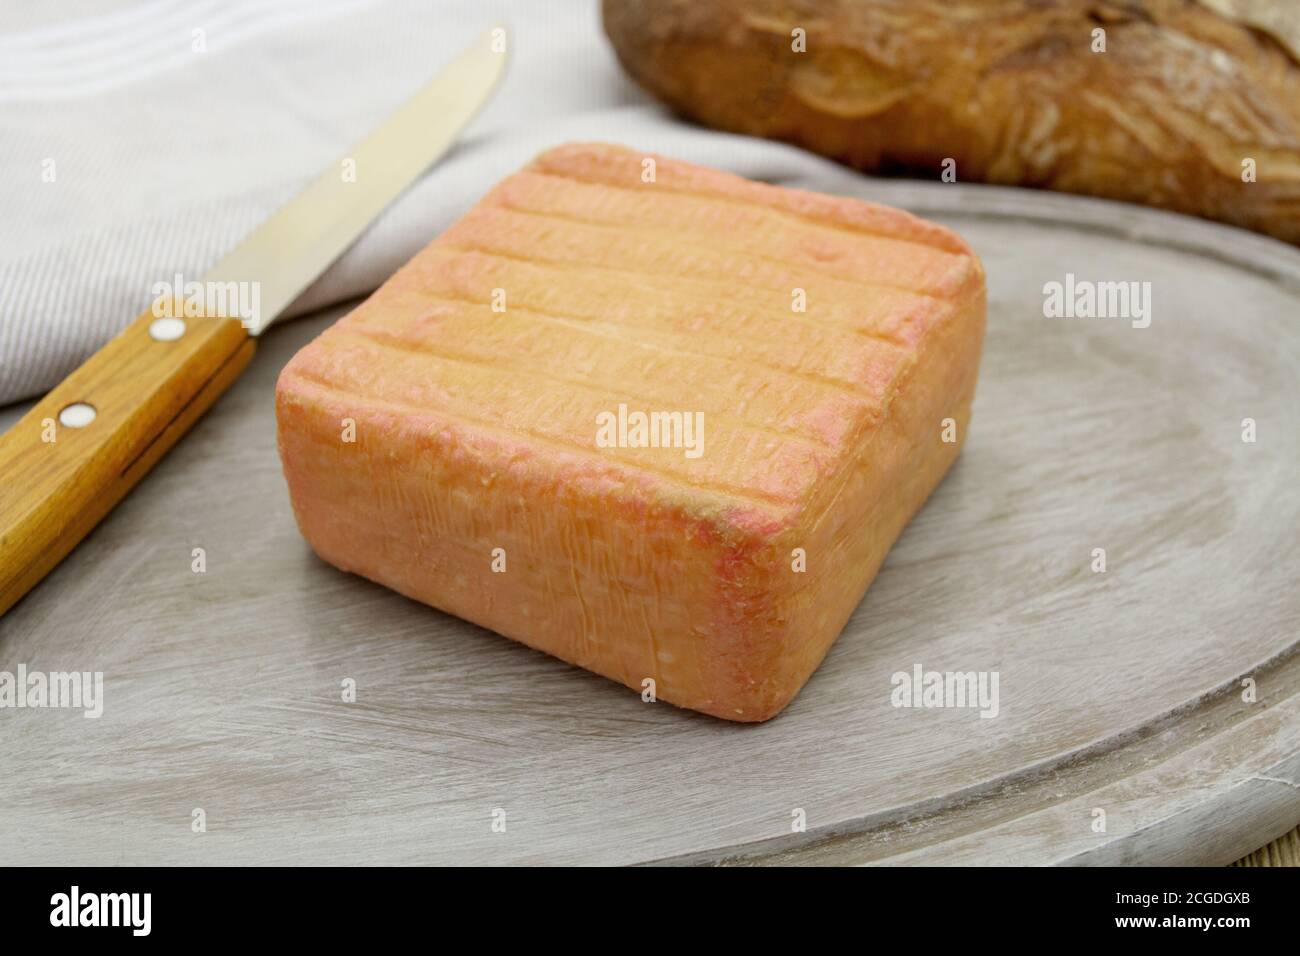 maroilles on a cutting board Stock Photo